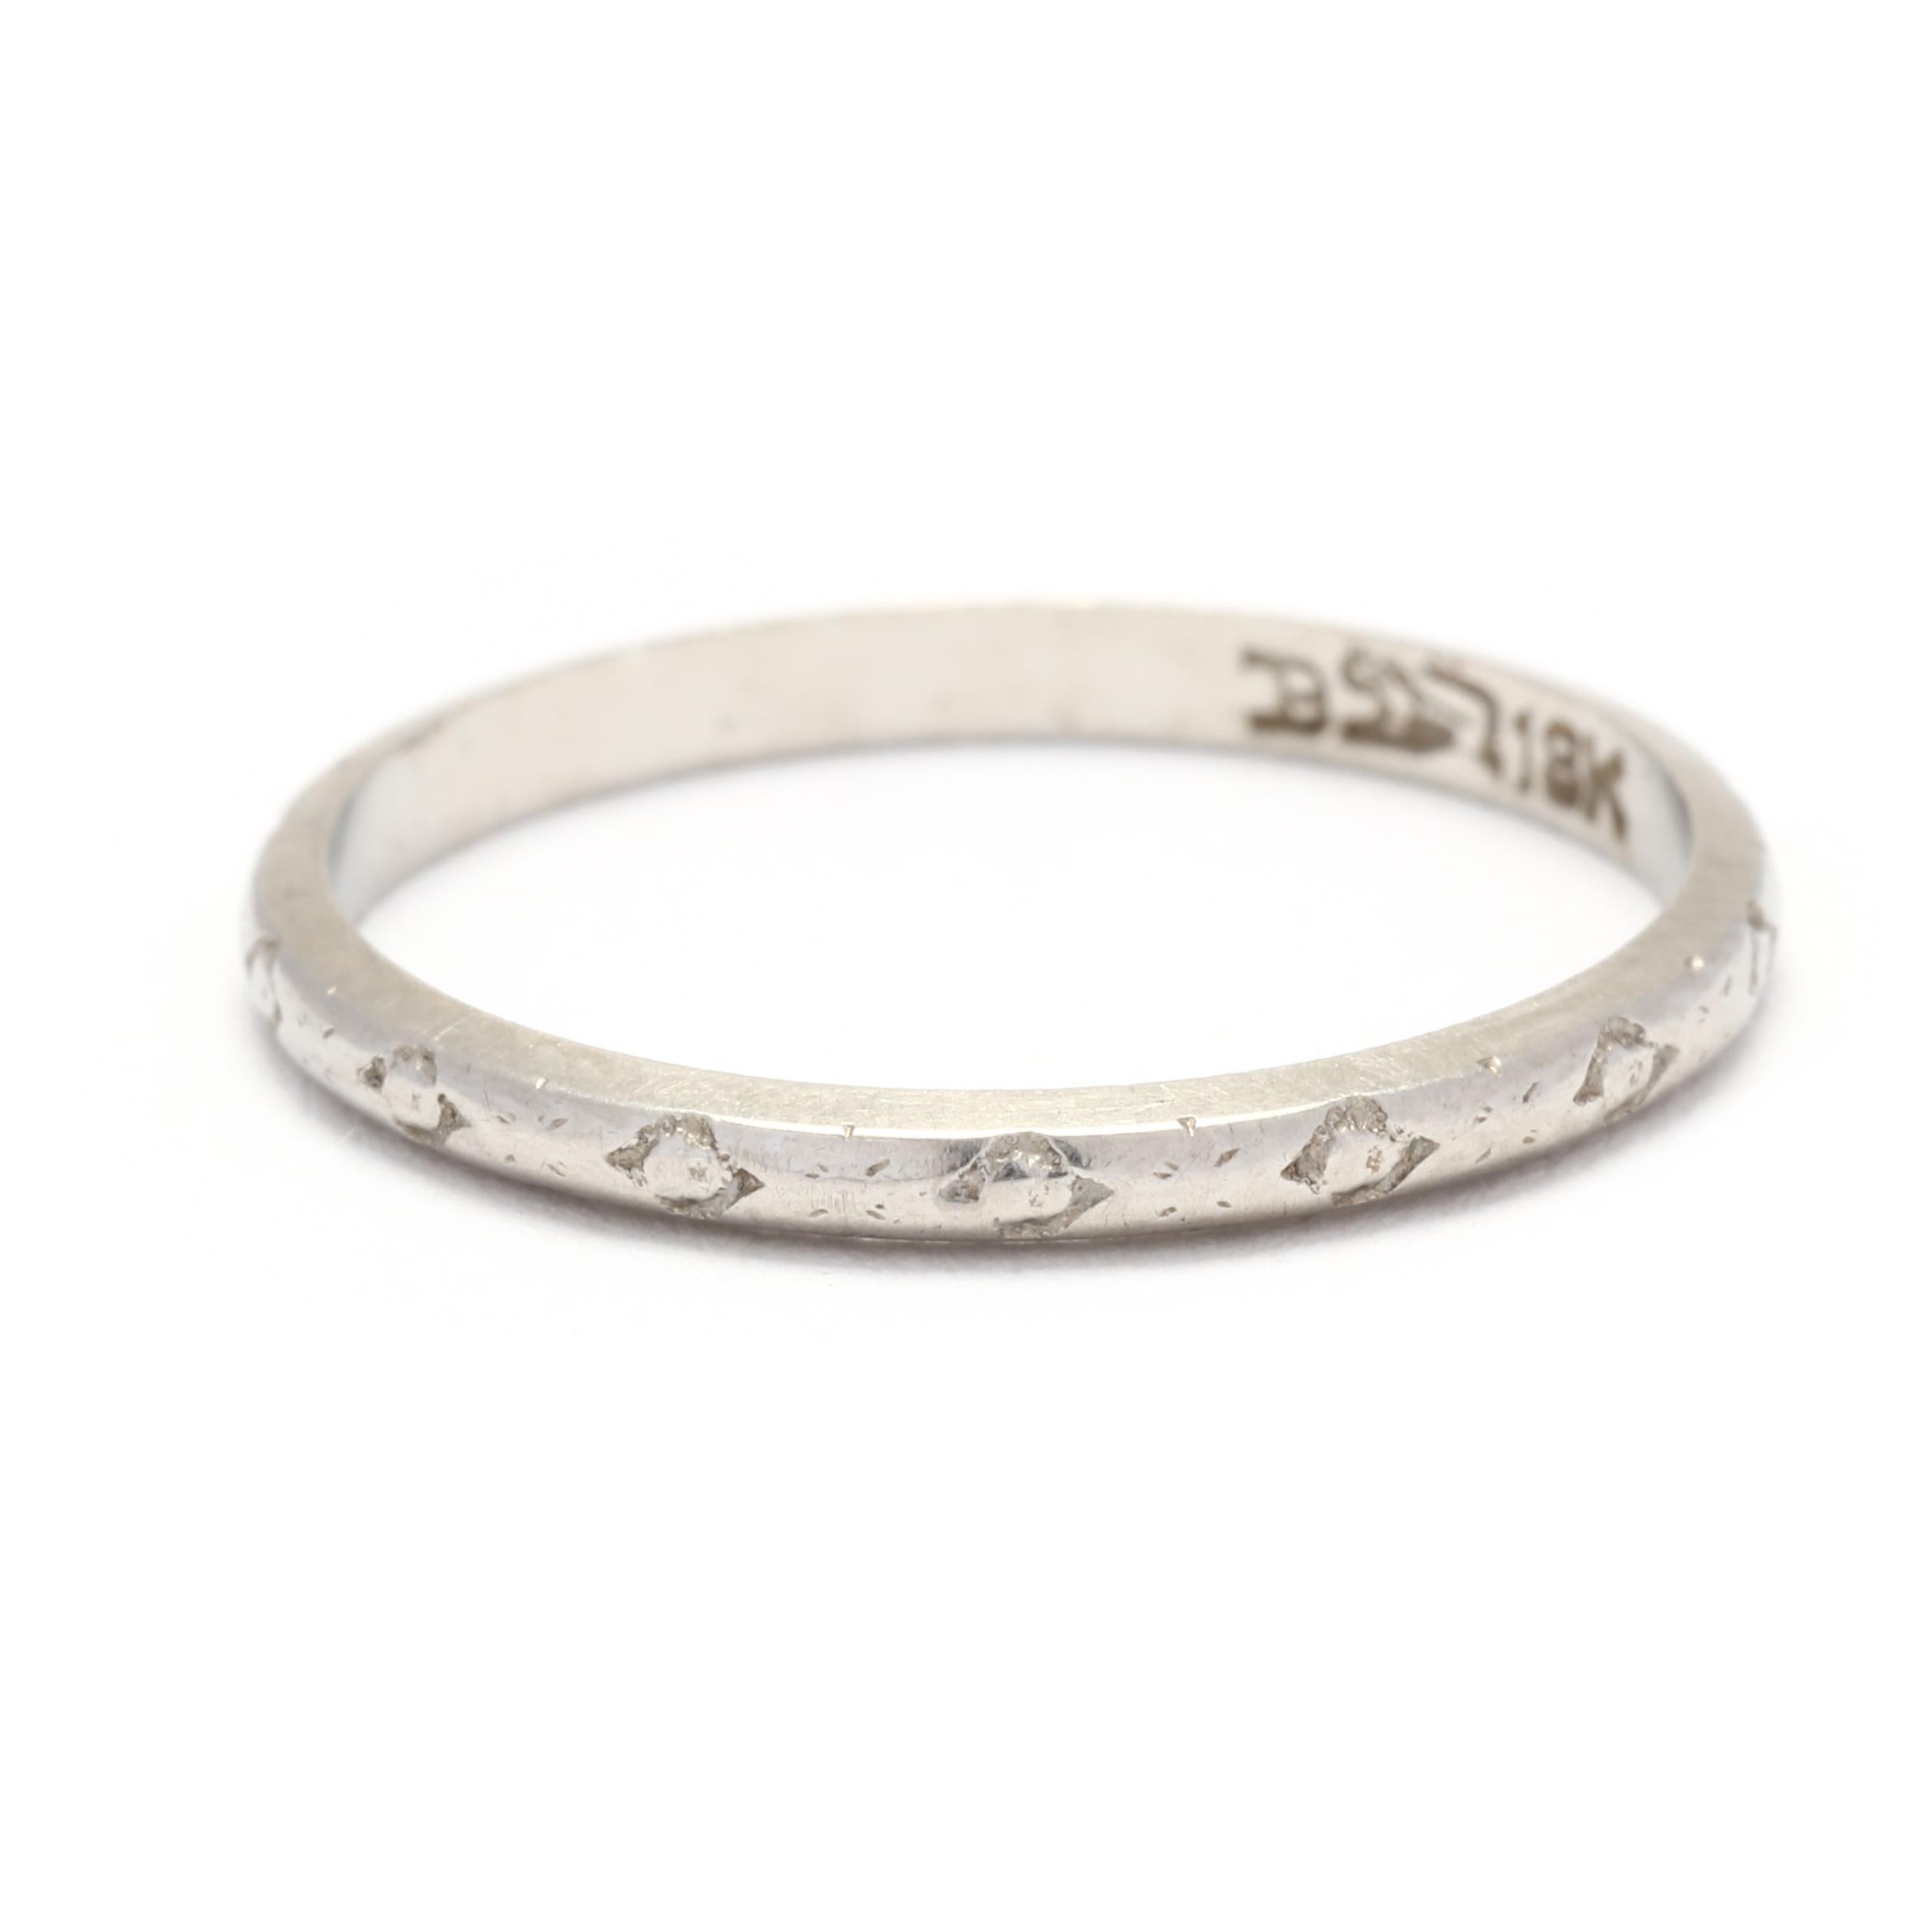 This Vintage Engraved Wedding Band is a beautiful and timeless choice for your special day. Made with 18K white gold, this ring is durable and lustrous. It features delicate and intricate engravings, adding a romantic and vintage-inspired touch to